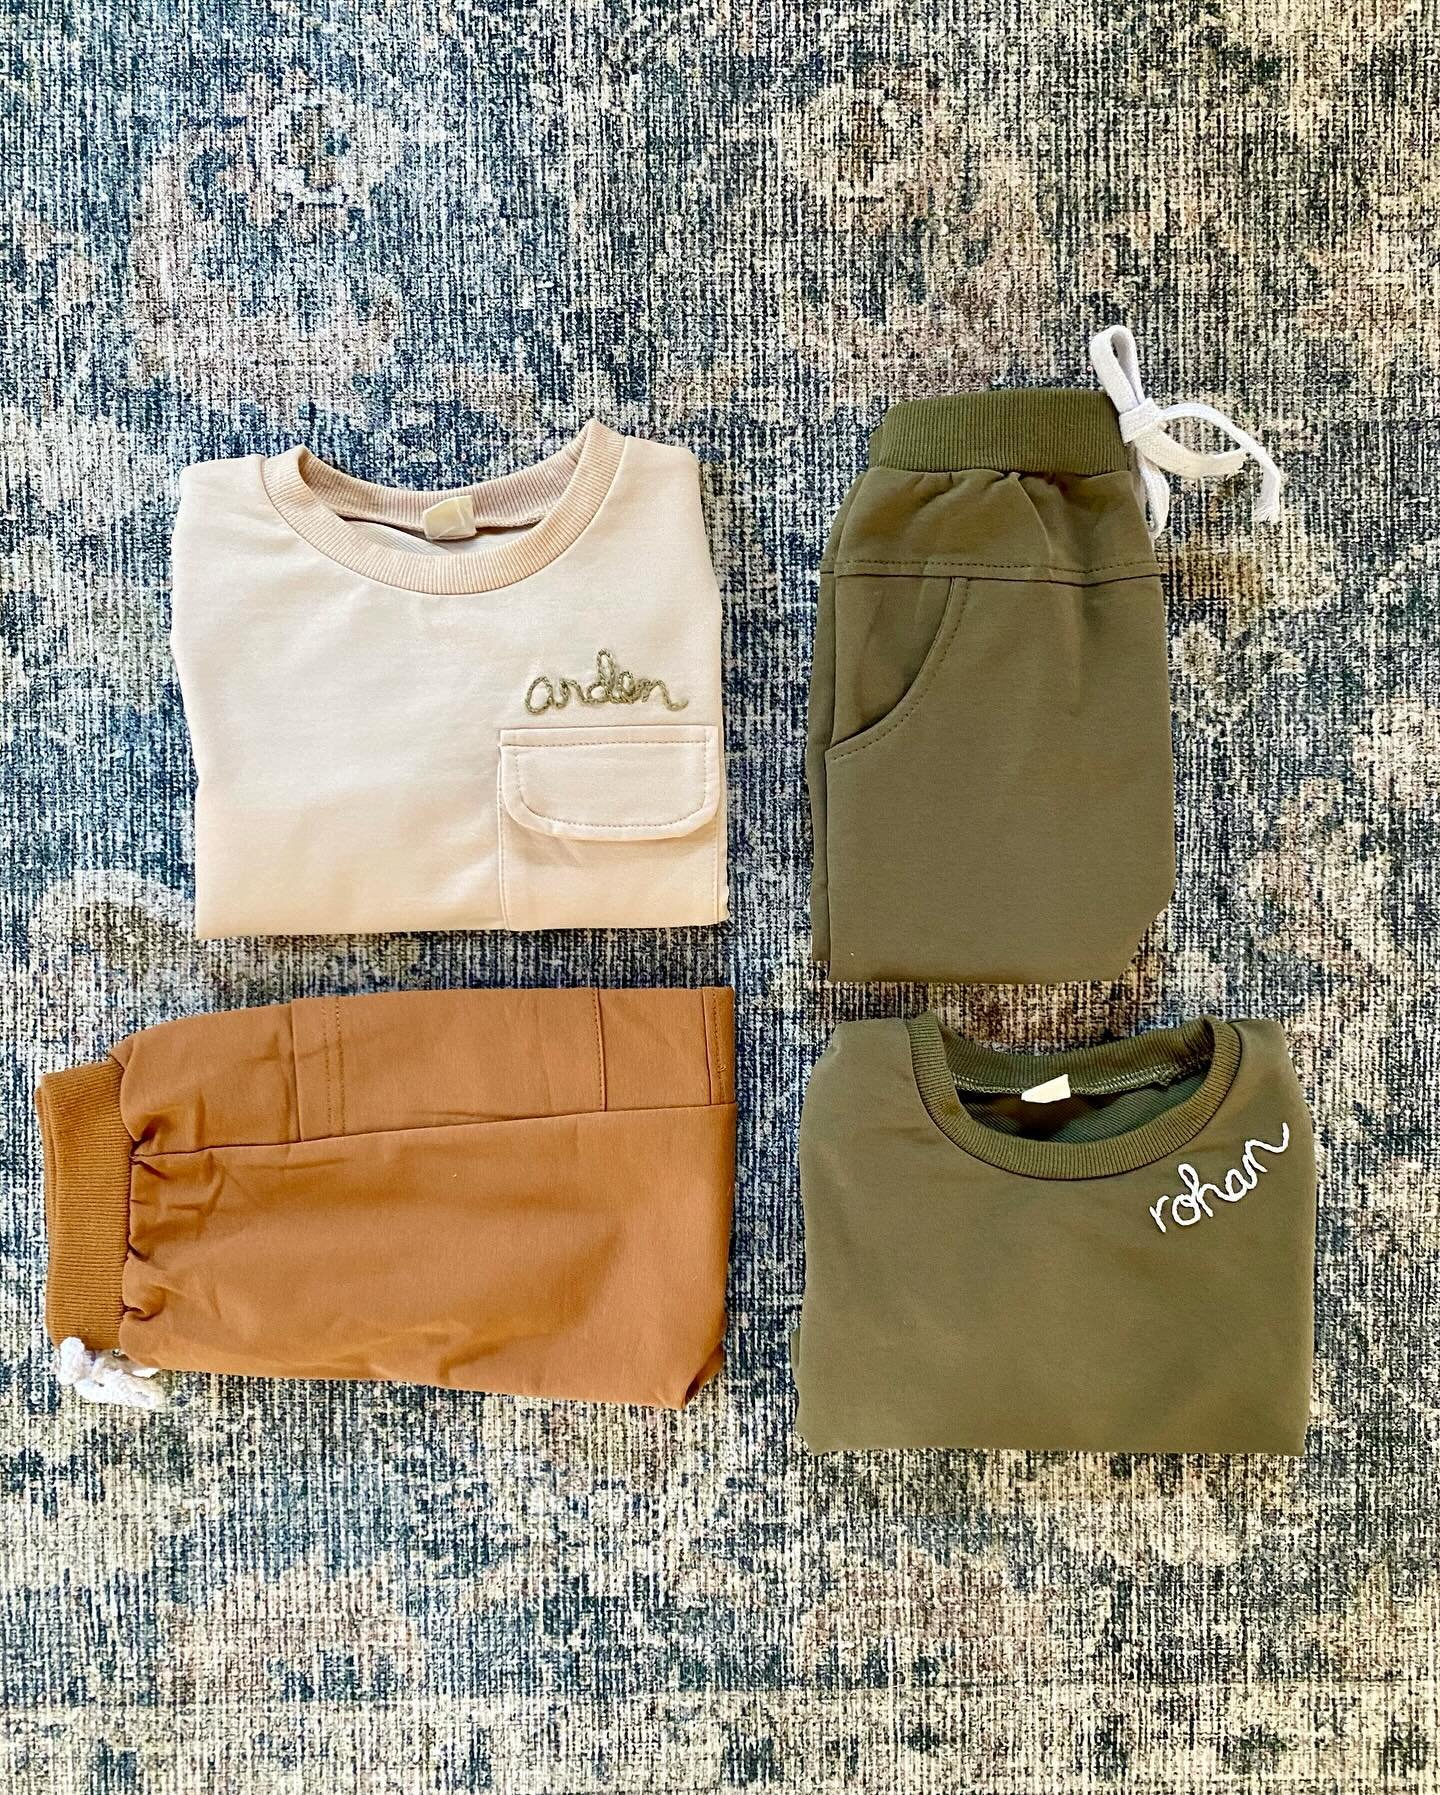 jogger. sets. for the boys. jogger sets for the boys😎🤙🏻 #iykyk

Spring Jogger Sets for brothers Arden + Rohan! ⚡️